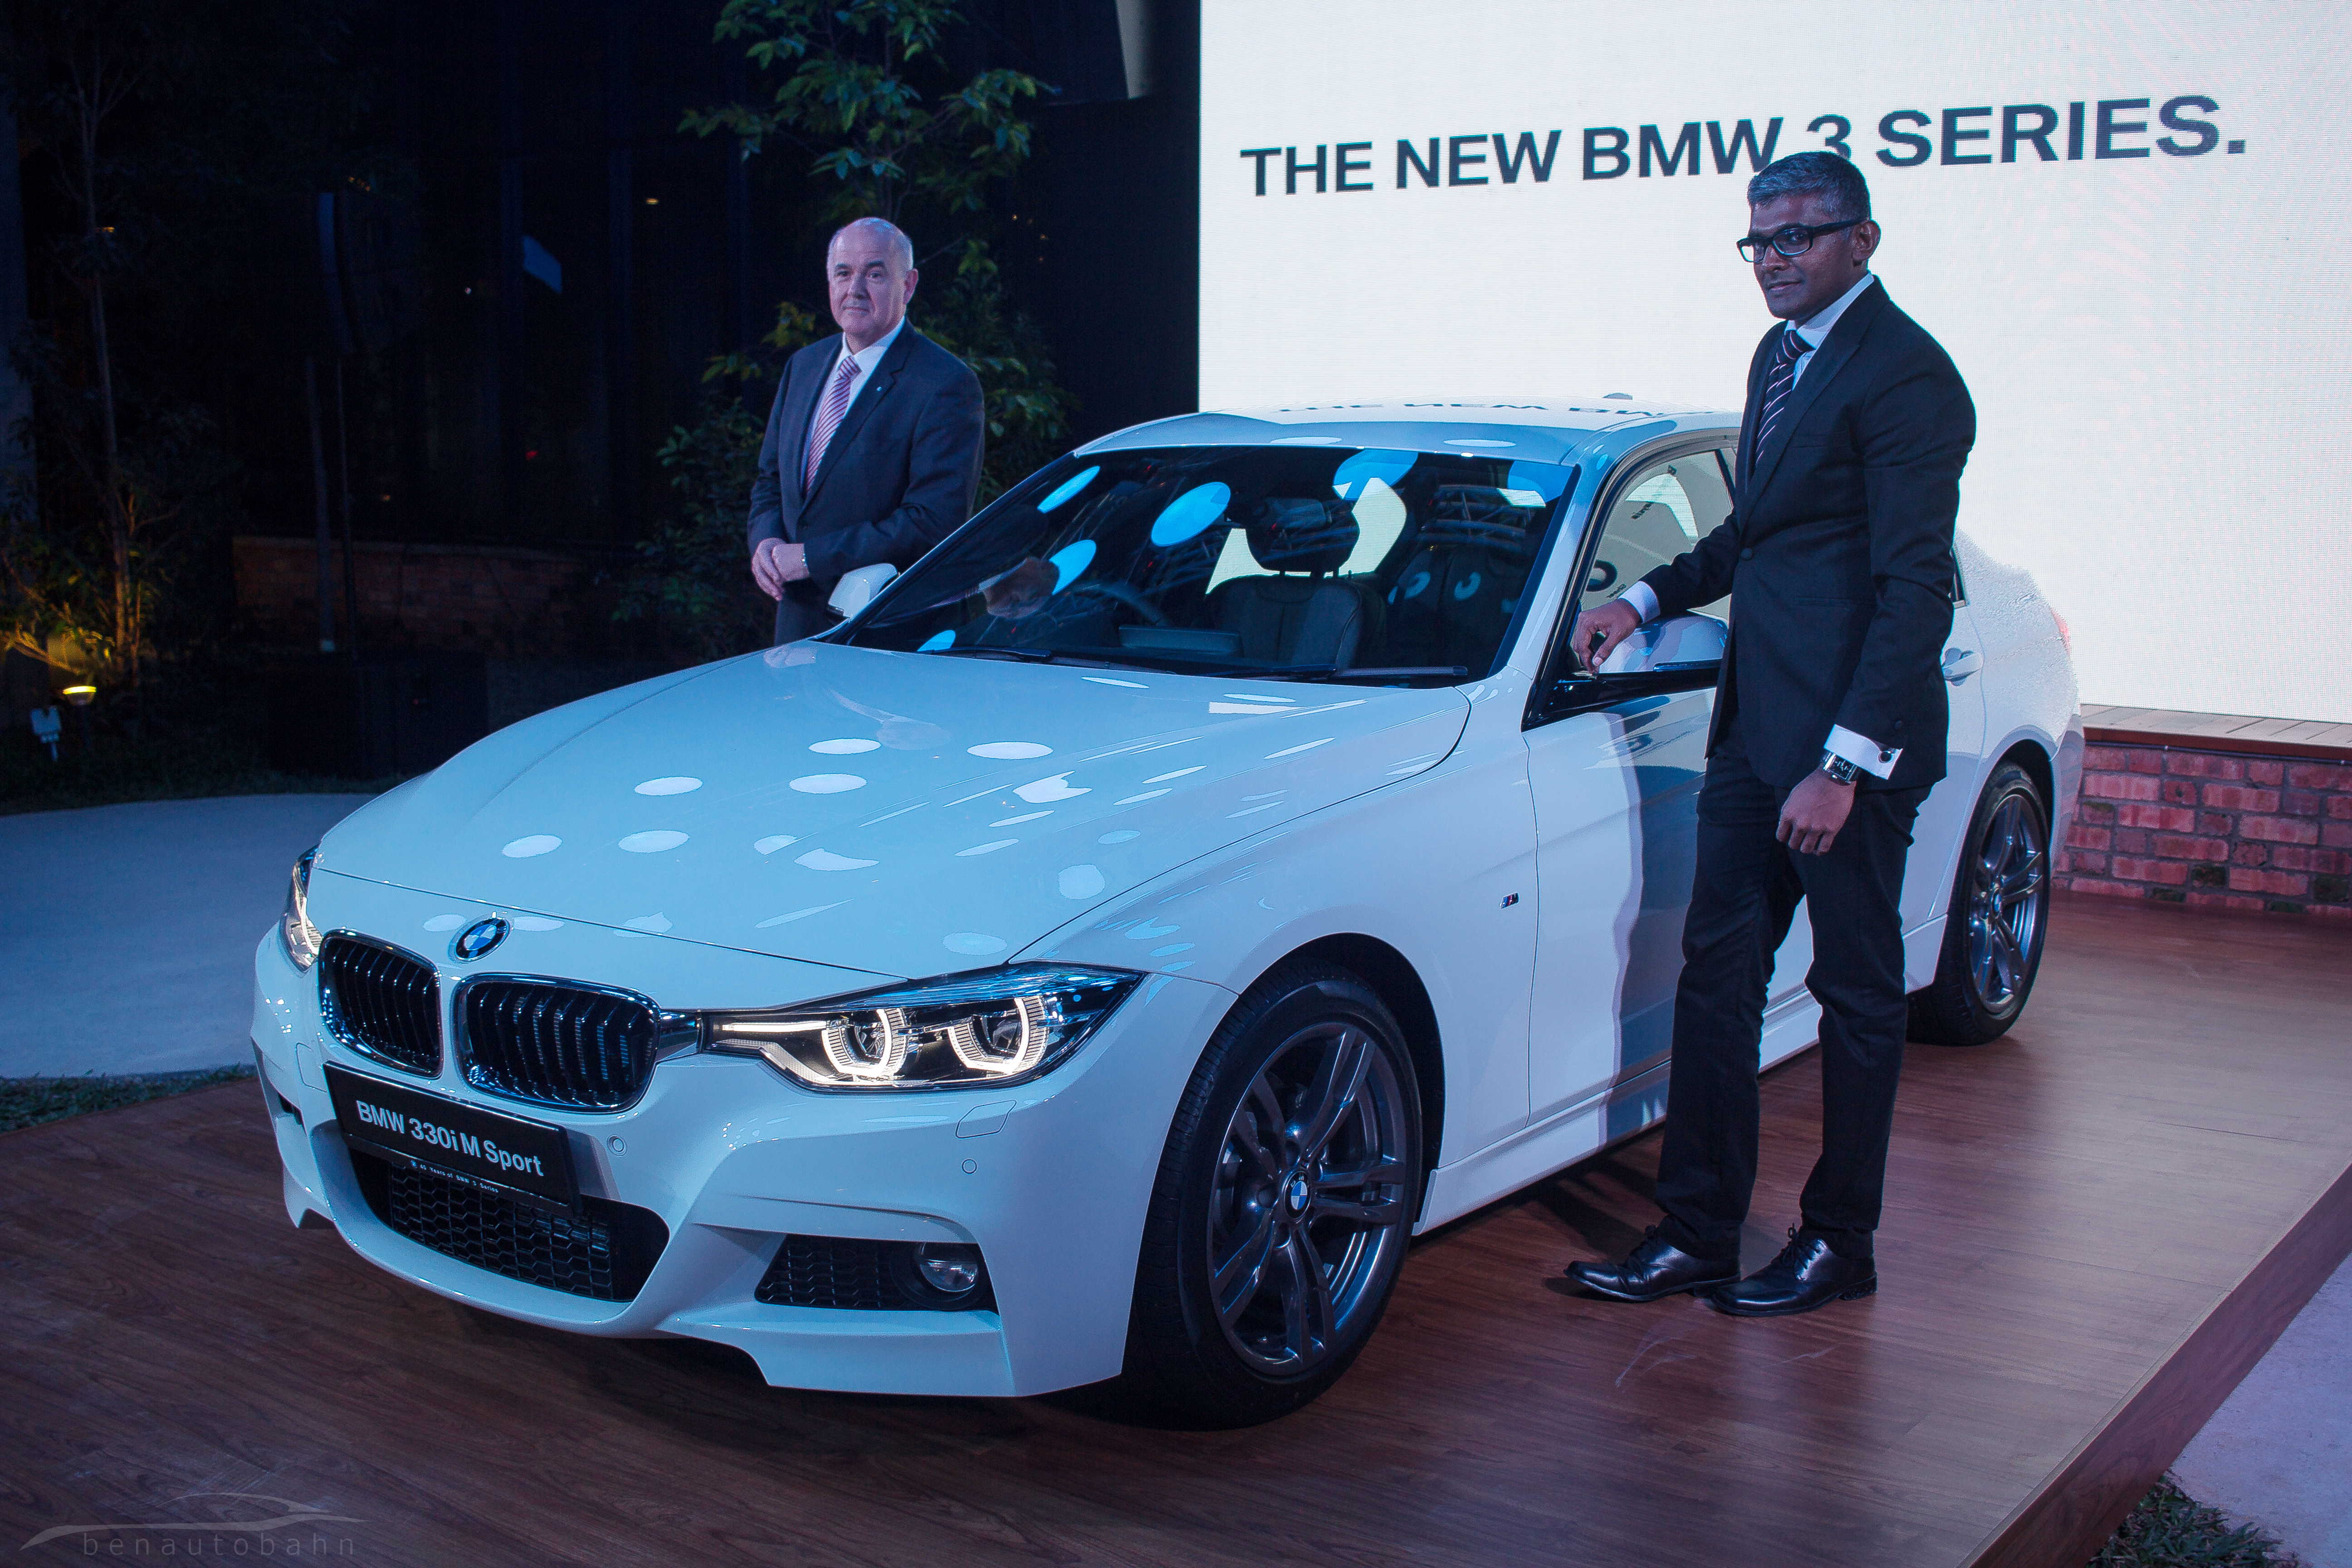 BMW 3 Series facelift launch